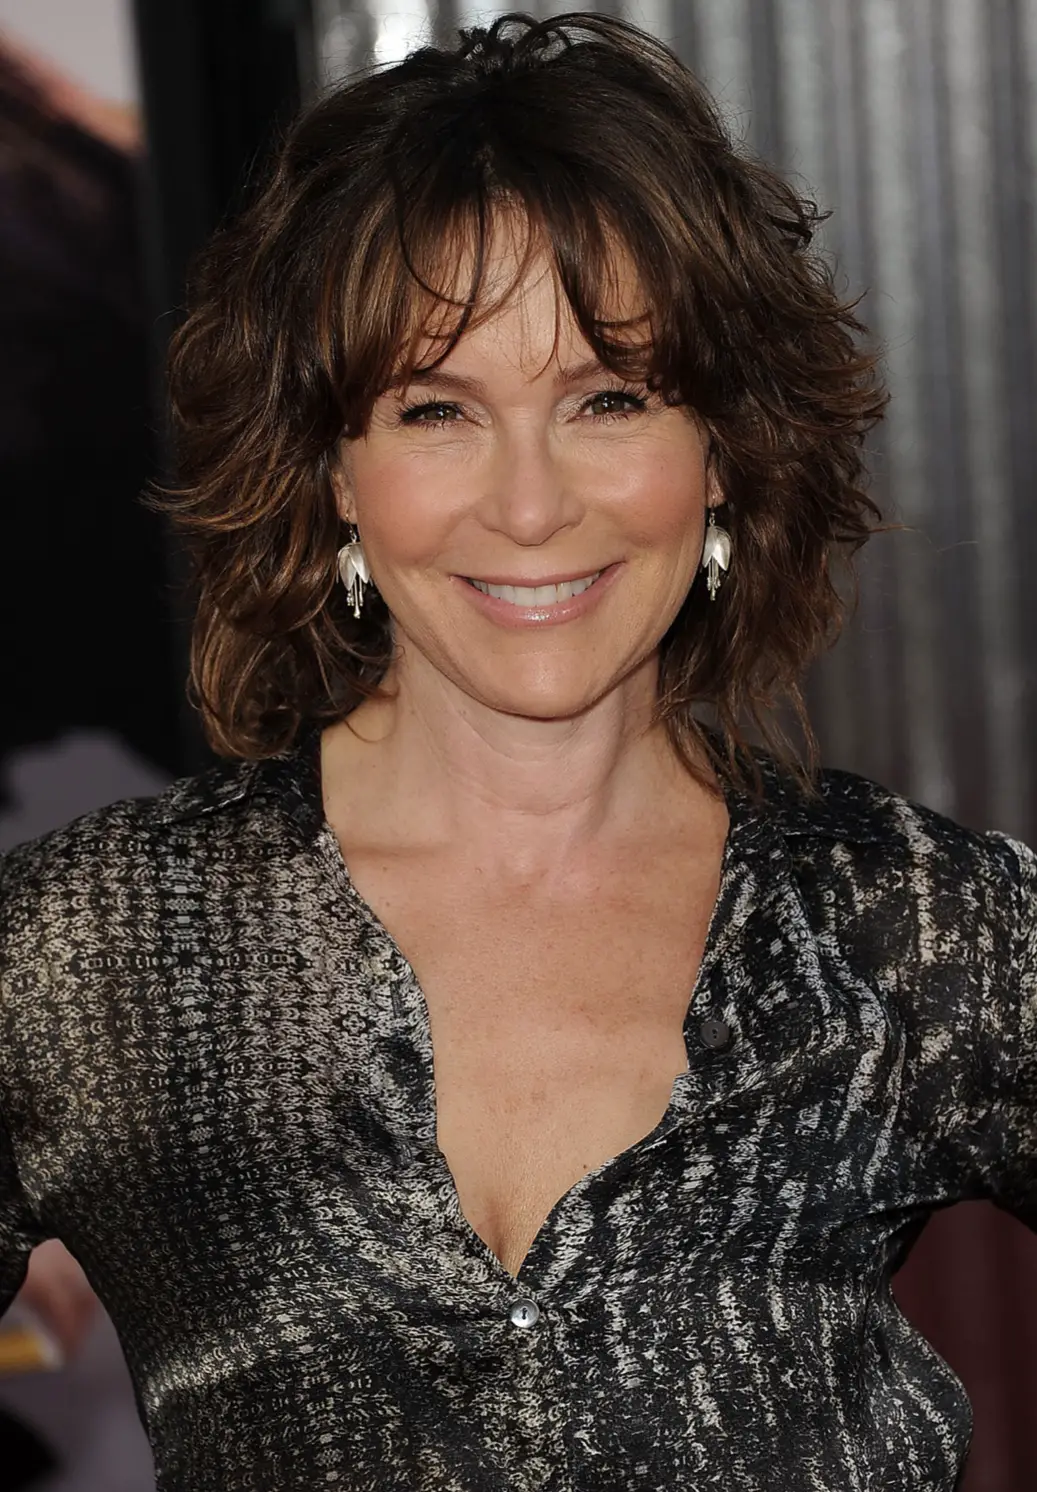 Jennifer Grey Talks About Her Upcoming Memoir "Out of the Corner"